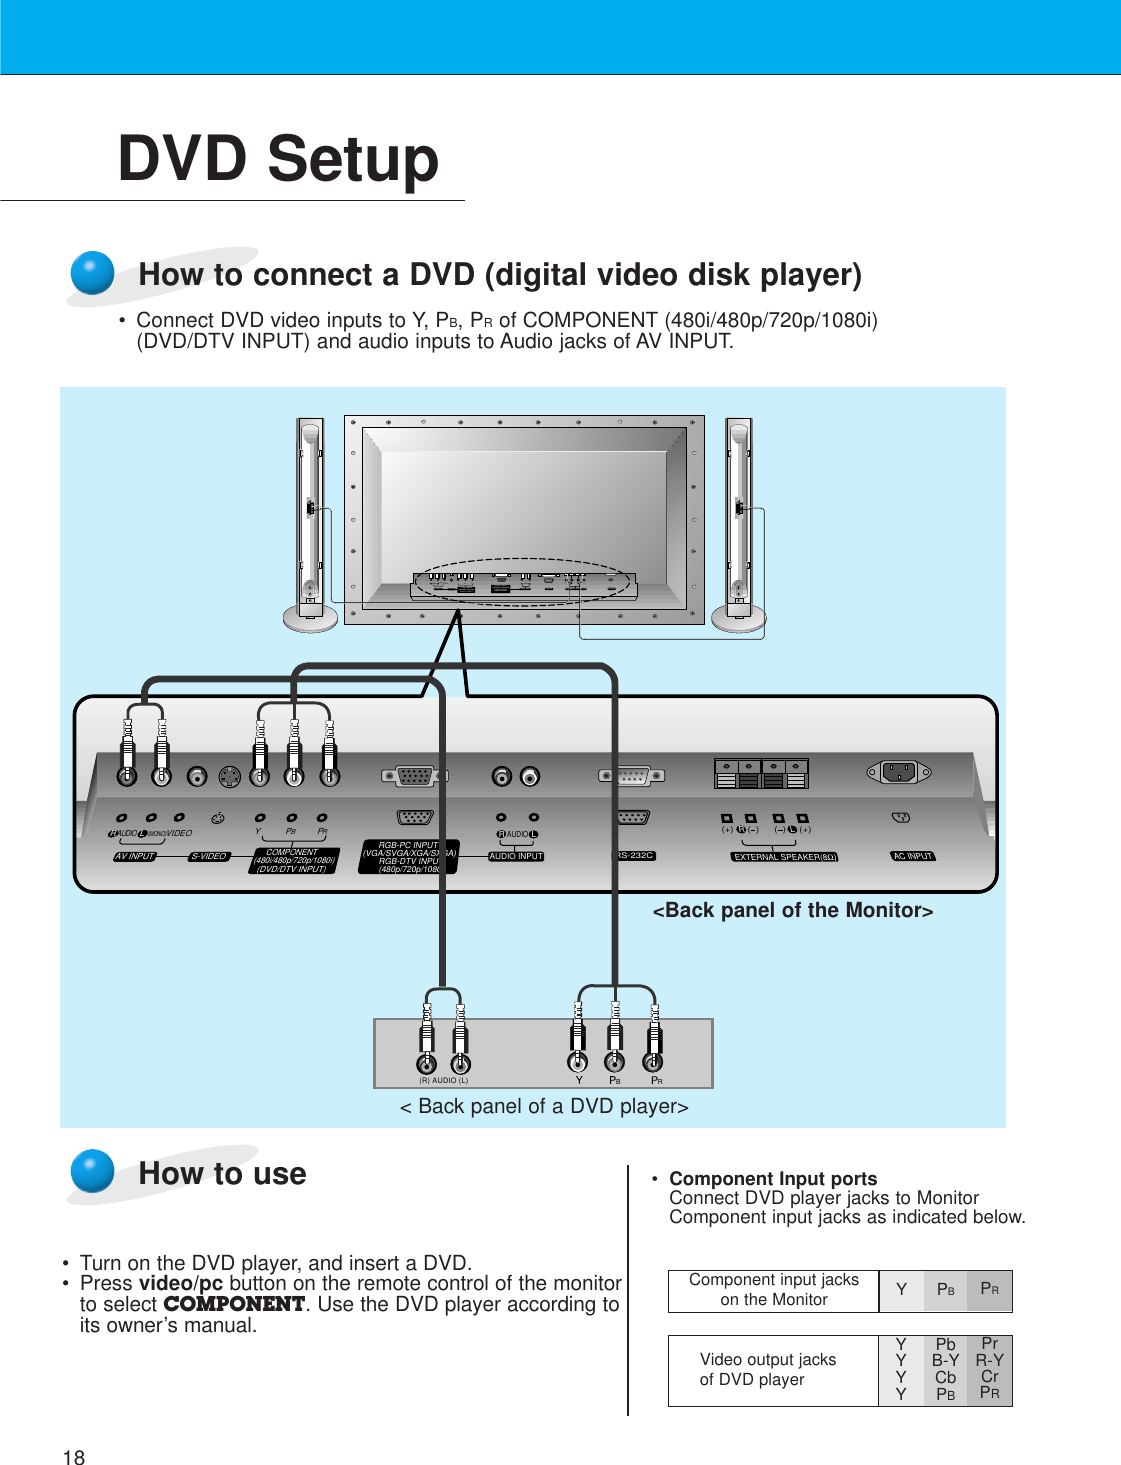 18DVD Setup• Connect DVD video inputs to Y, PB, PRof COMPONENT (480i/480p/720p/1080i)(DVD/DTV INPUT) and audio inputs to Audio jacks of AV INPUT.How to connect a DVD (digital video disk player)How to use• Turn on the DVD player, and insert a DVD.• Press video/pc button on the remote control of the monitorto select COMPONENT. Use the DVD player according toits owner’s manual.•Component Input portsConnect DVD player jacks to MonitorComponent input jacks as indicated below.(+) (  ) (+)(  )AUDIO(MONO)R L VIDEO Y P B RPAV INPUTAUDIOR L RLEXTERNAL SPEAKER (8Ω) AC INPUTAUDIO INPUTS-VIDEO COMPONENT(480i/480p/720p/1080i)RGB-PC INPUT(VGA/SVGA/XGA/SXGA)RGB-DTV INPUT(480p/720p/1080i)(DVD/DTV INPUT)(+) (  ) (+)(  )AUDIO(MONO)R LAV INPUT S-VIDEOCOMPONENT(480i/480p/720p/1080i)(DVD/DTV INPUT)RGB-PC INPUTRAUDIO INPUTEXTERNAL SPEAKER(8Ω)R LAC INPUTLAUDIO(VGA/SVGA/XGA/SXGA)RGB-DTV INPUT(480p/720p/1080i)VIDEO Y PBPRBR(R) AUDIO (L)RS-232CRS-232C&lt; Back panel of a DVD player&gt;Component input jacks on the Monitor YPBPRVideo output jacks of DVD playerYYYYPbB-YCbPBPrR-YCrPR&lt;Back panel of the Monitor&gt;